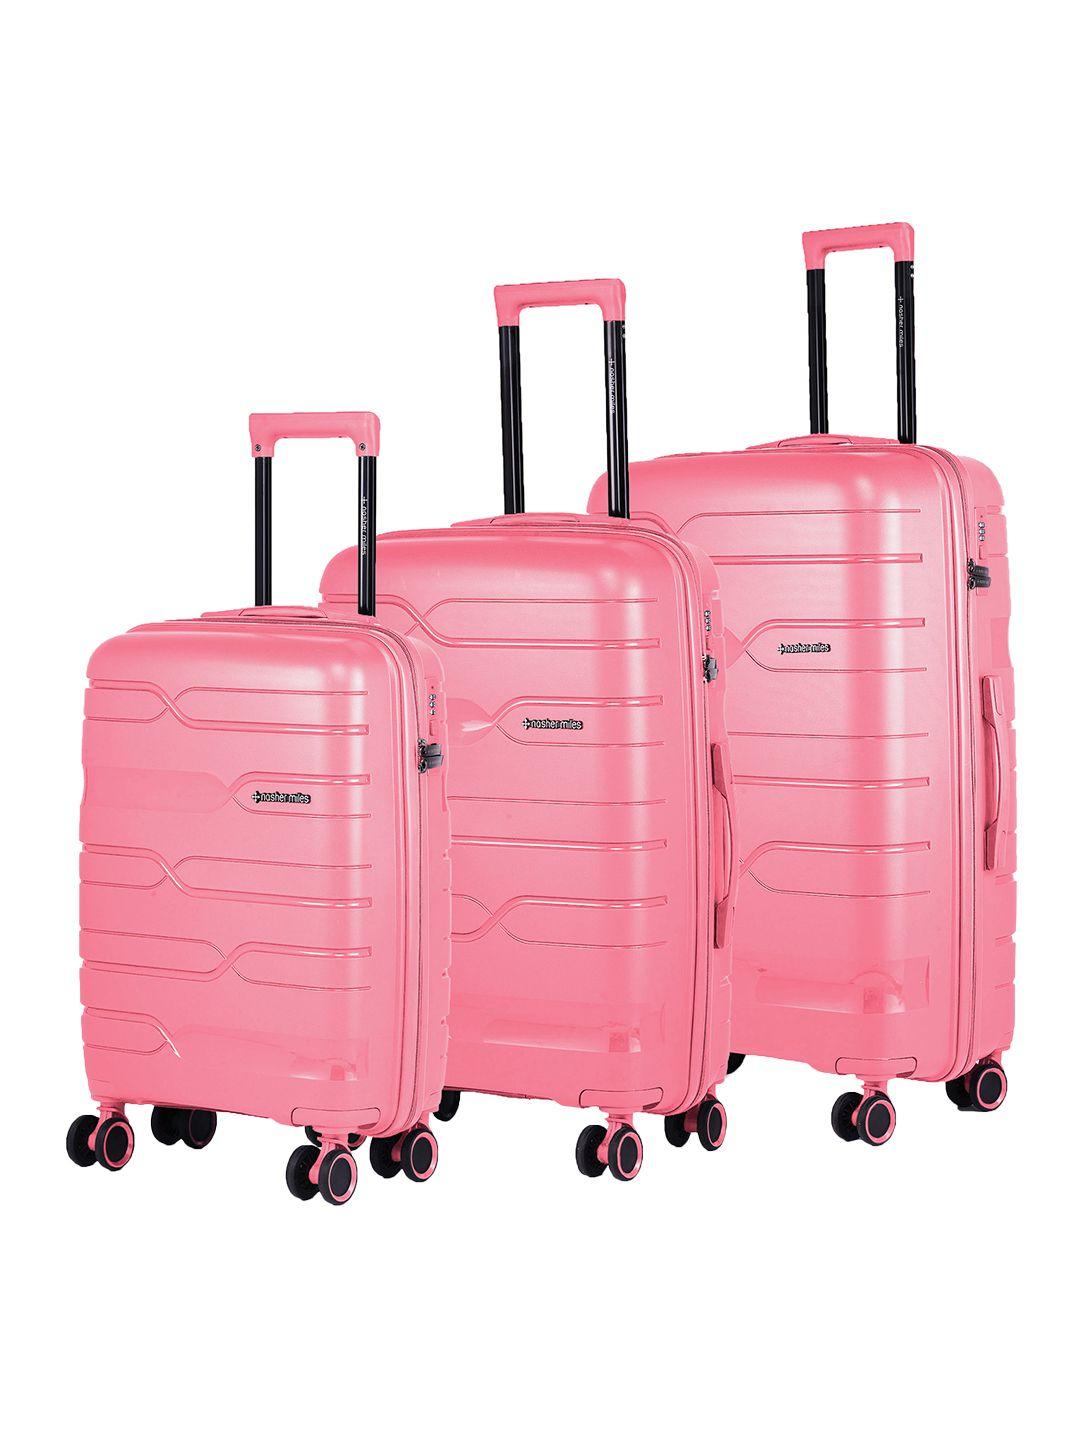 nasher miles set of 3 pink textured hard-sided trolley suitcases